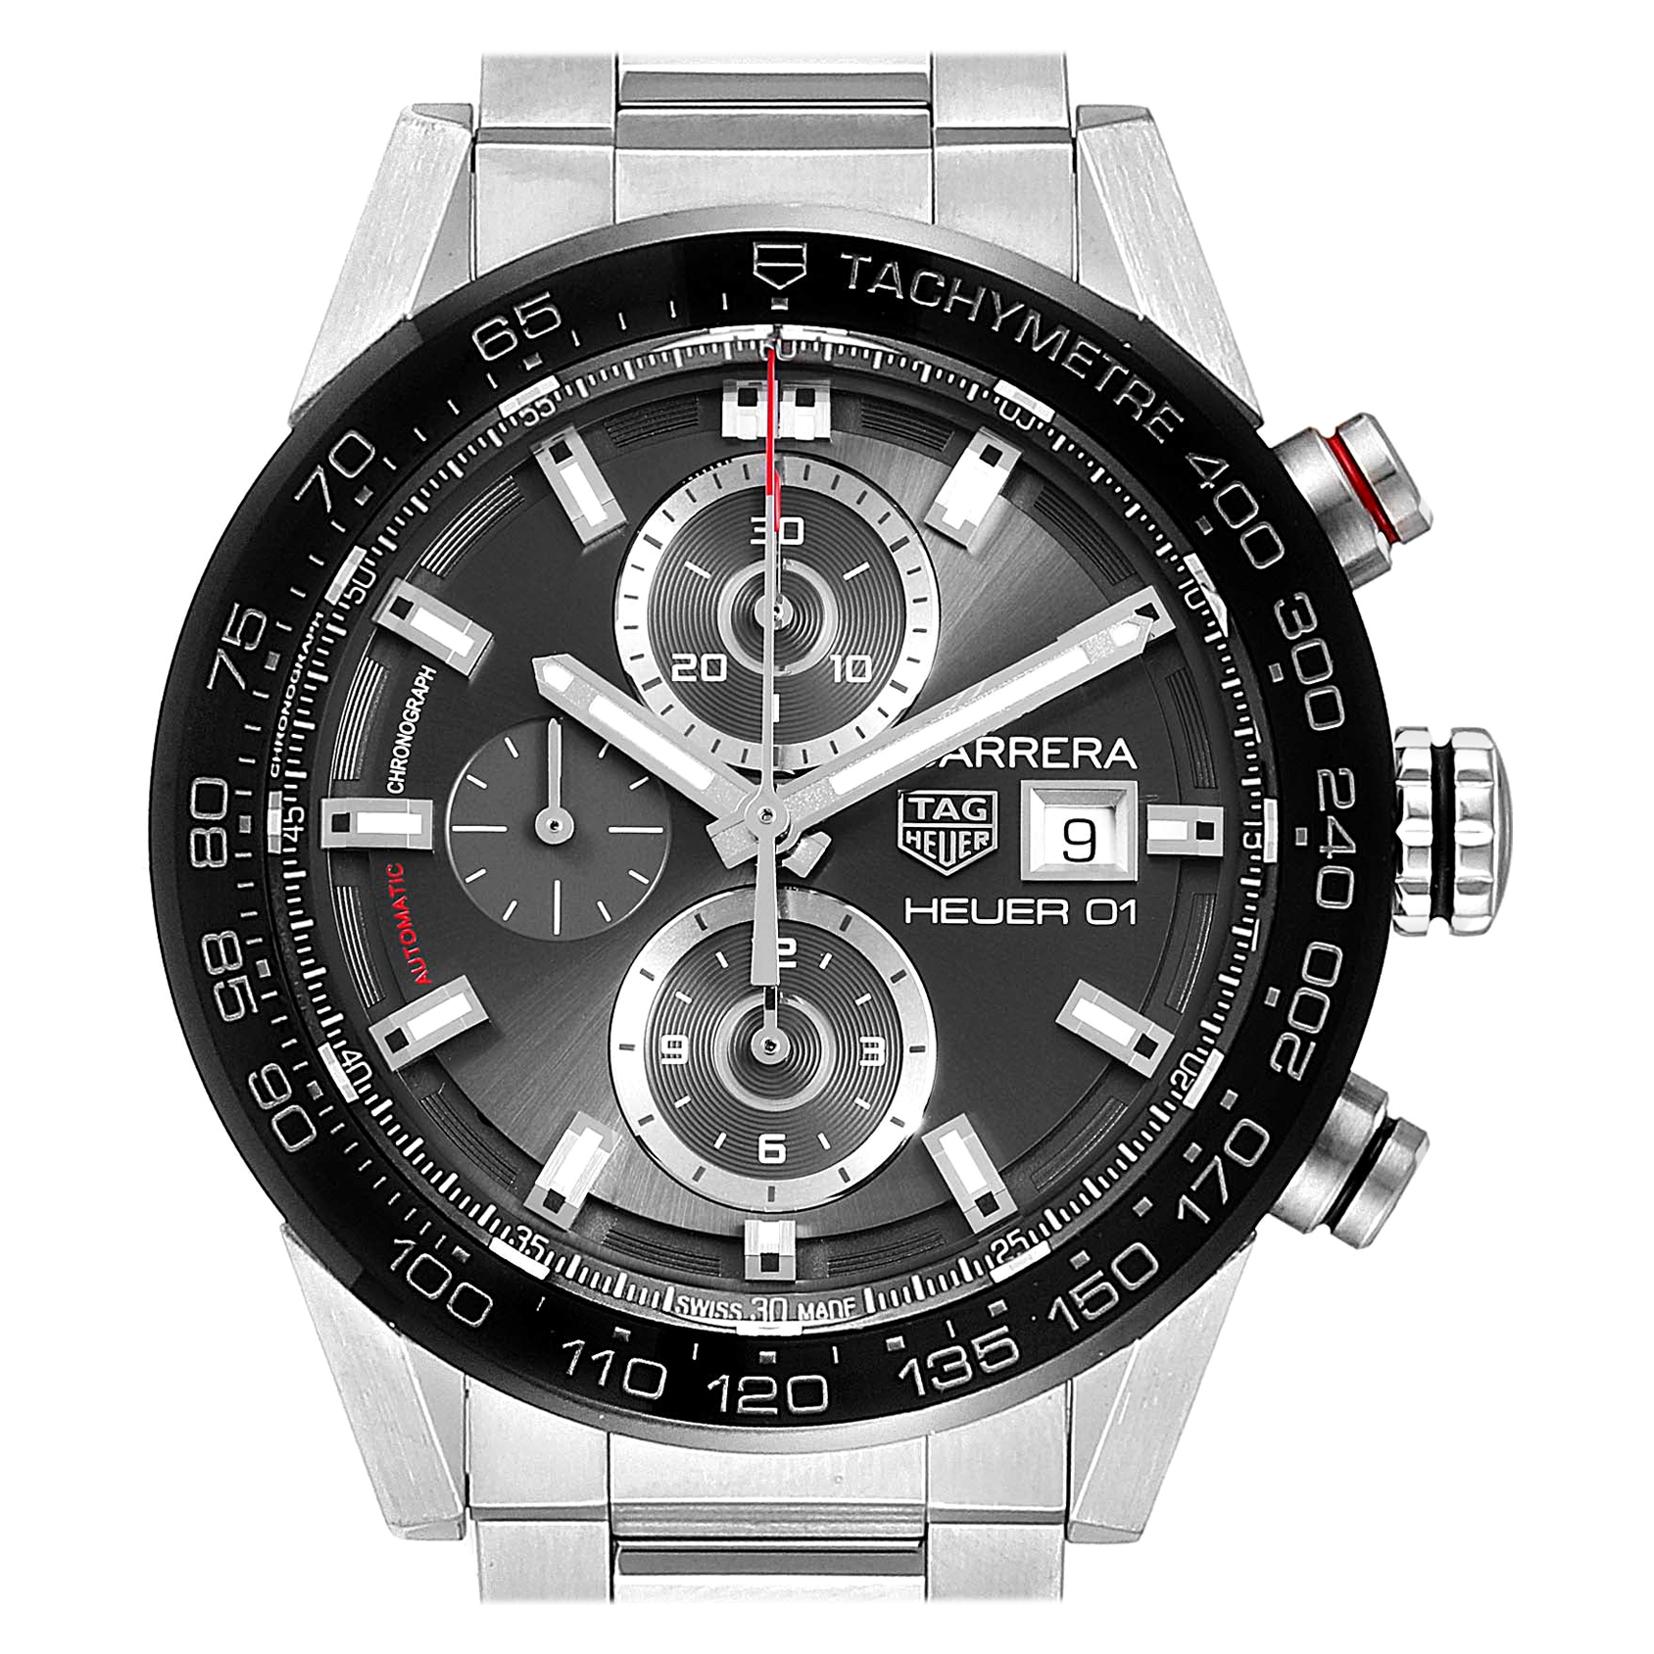 TAG Heuer Carrera Chronograph Automatic Men's Watch CAR201W Box Card For Sale